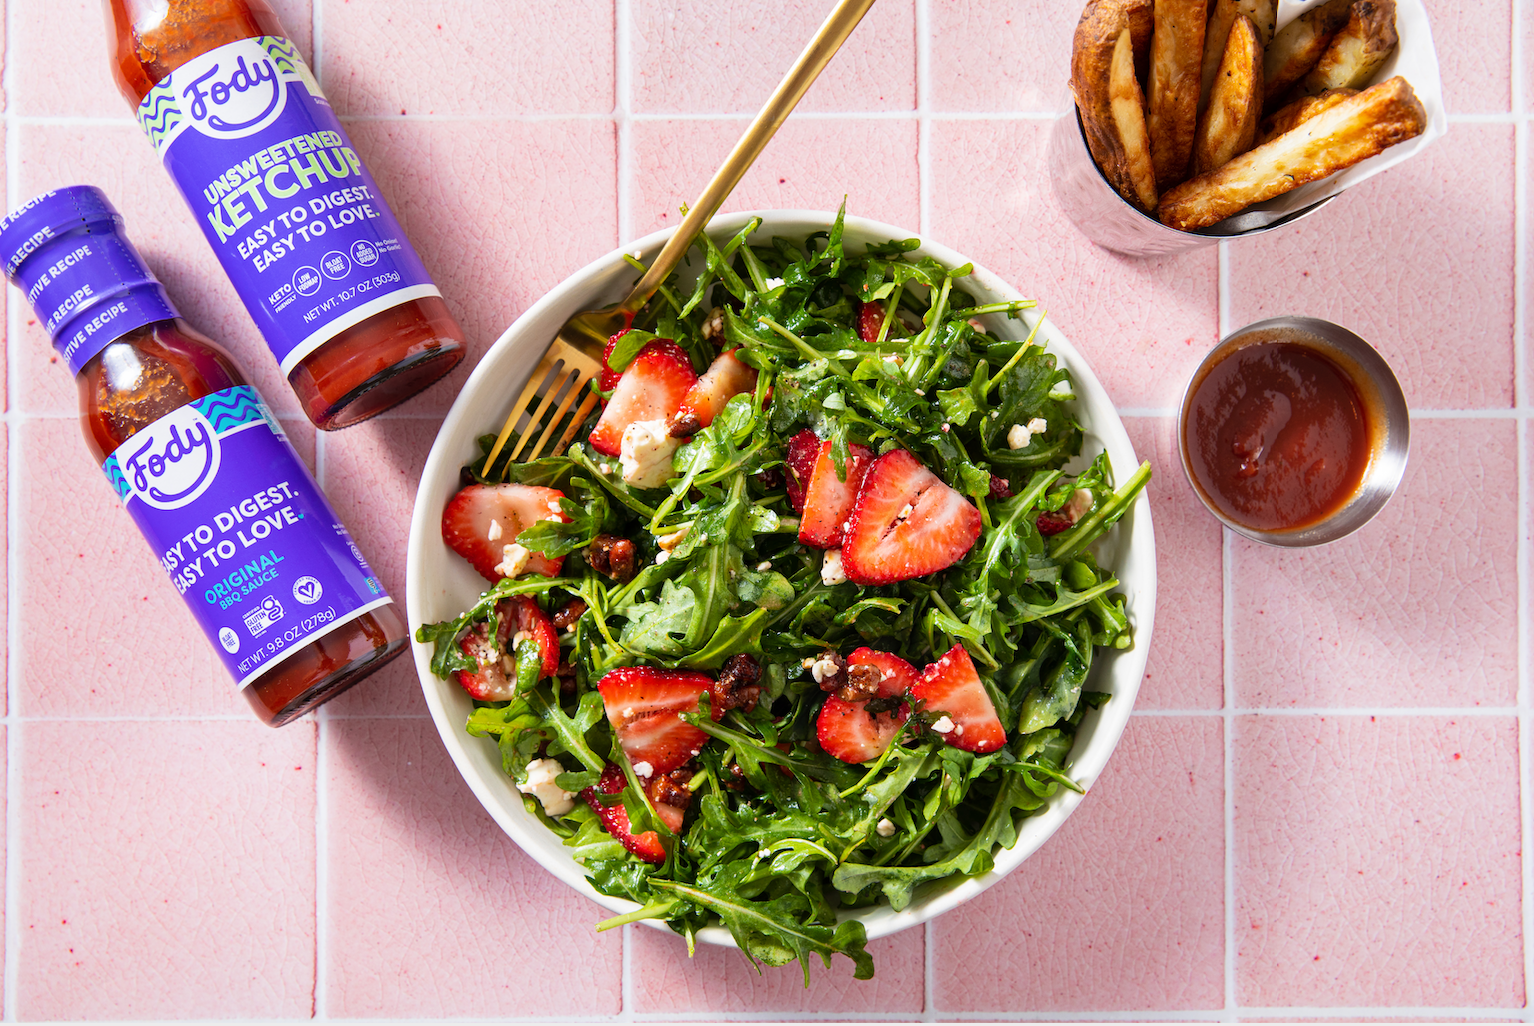 Fody’s Strawberry Arugula Salad with BBQ Toasted Pecans & Air Fryer Boardwalk Fries